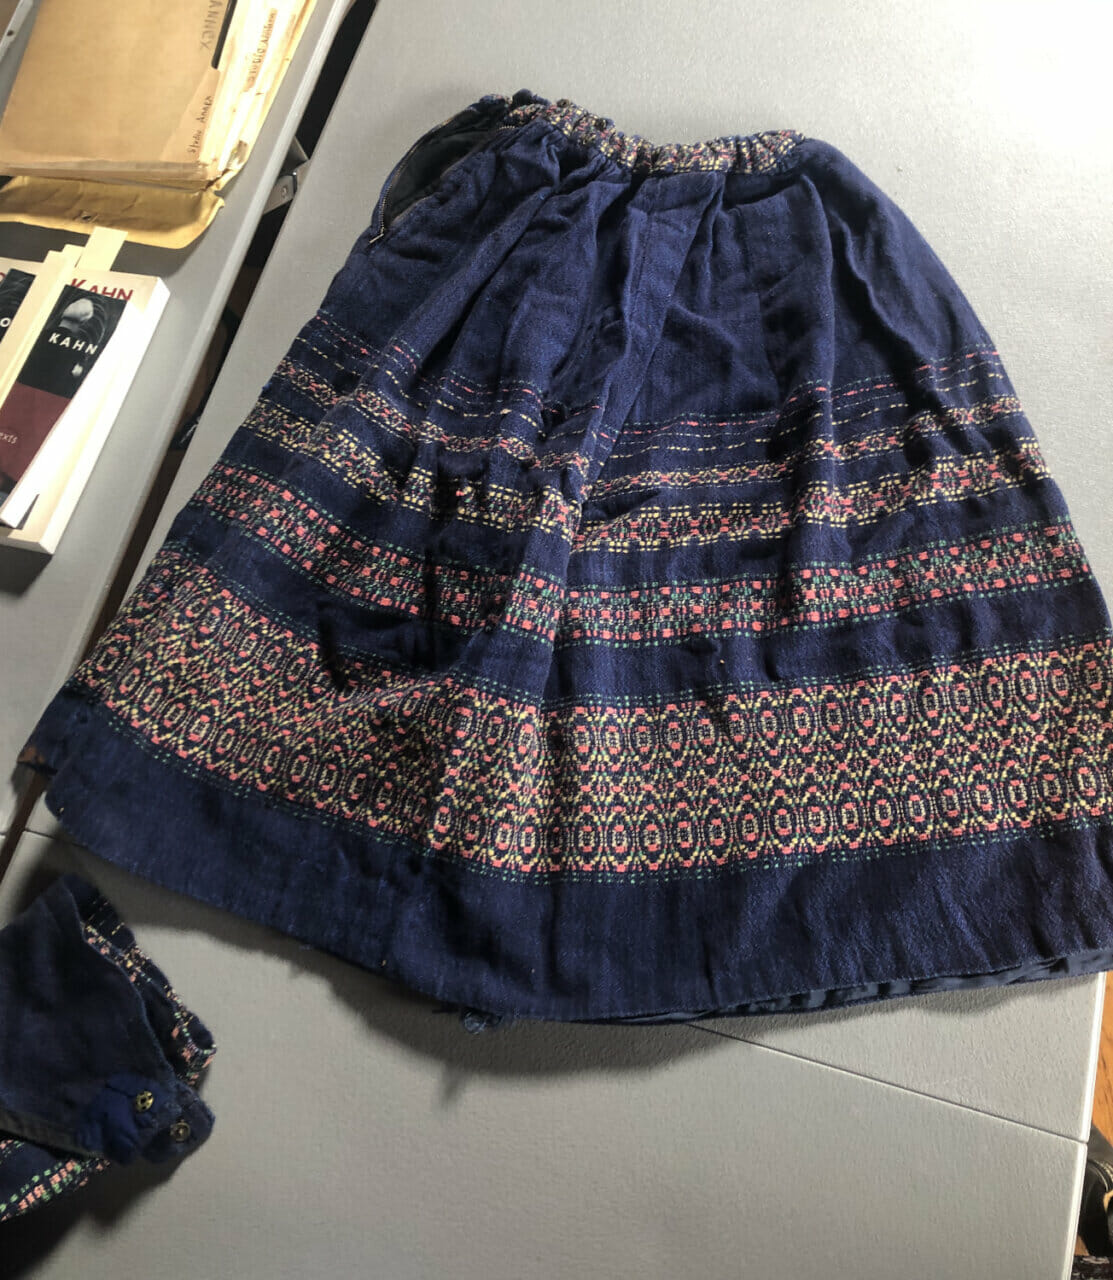 Woven skirt by Letty Esherick